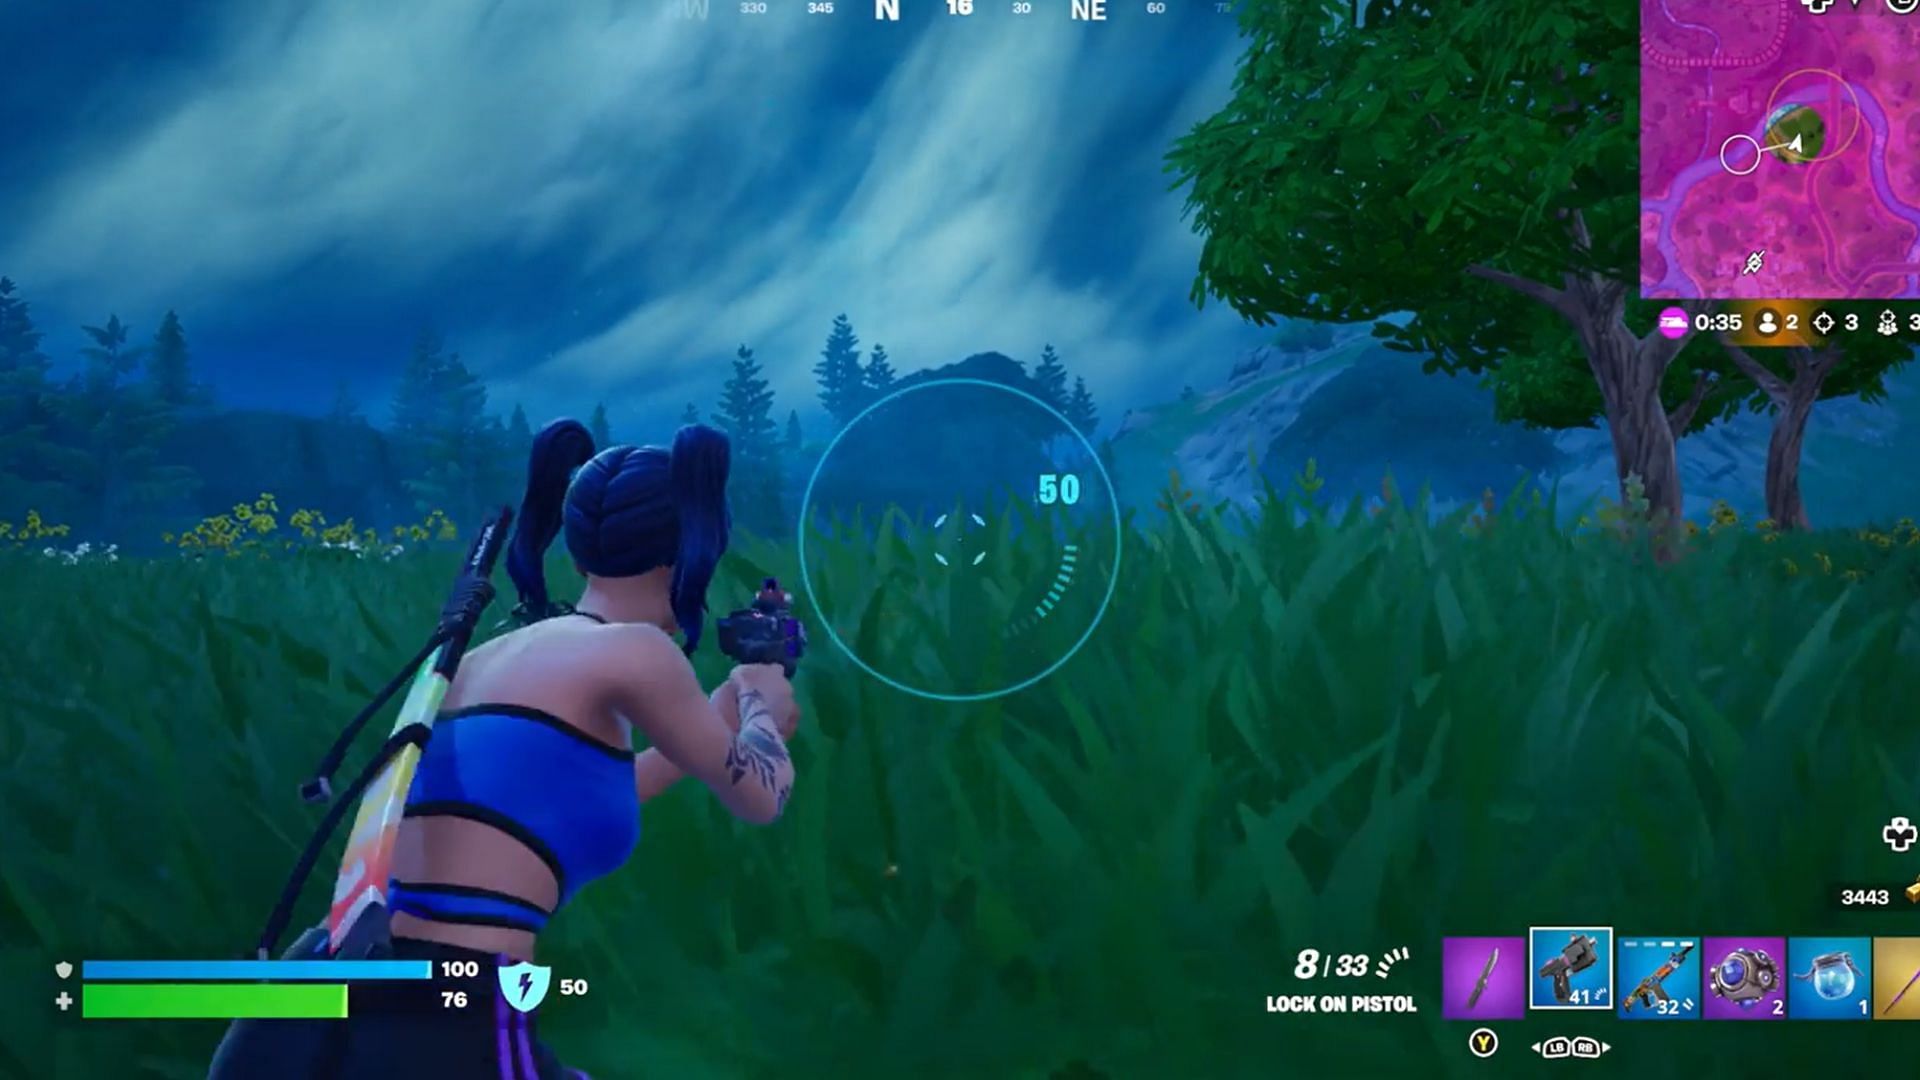 Fortnite player demonstrates the perfect use of the Lock-On Pistol, community left in awe